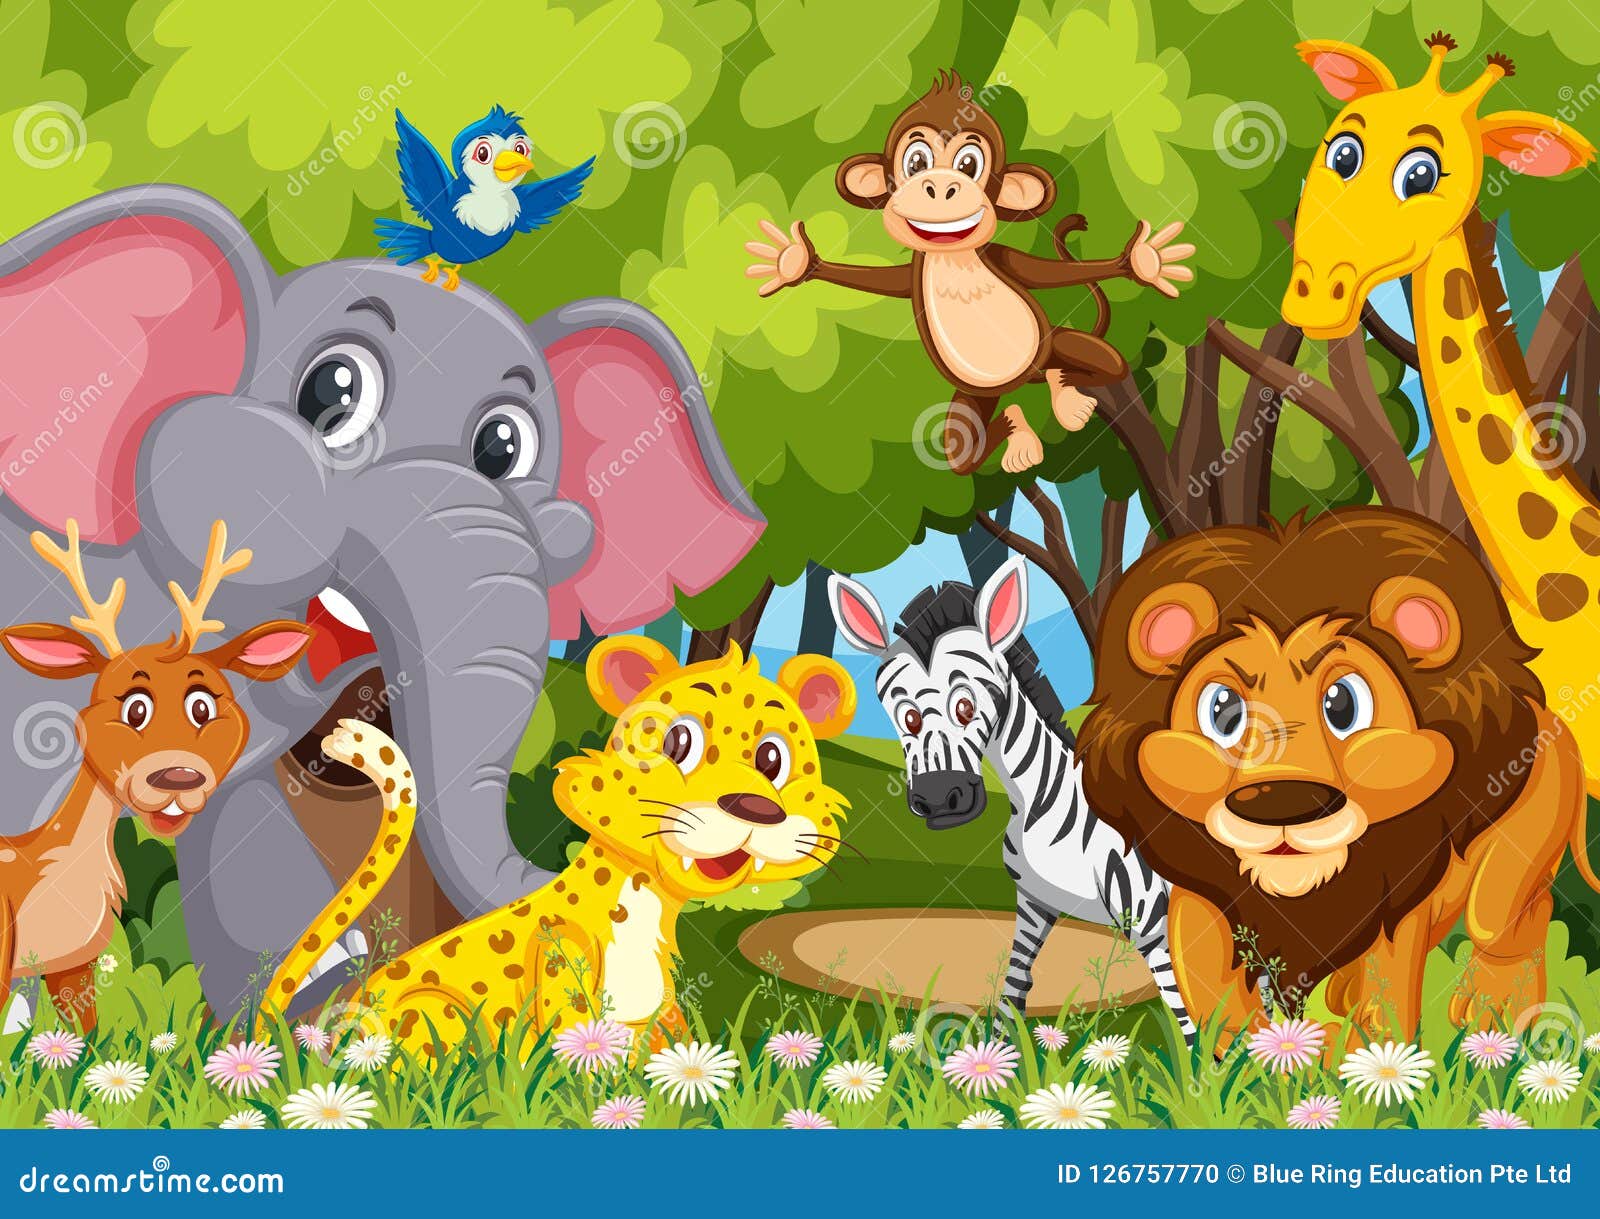 Group of animals in jungle stock vector. Illustration of lion - 126757770